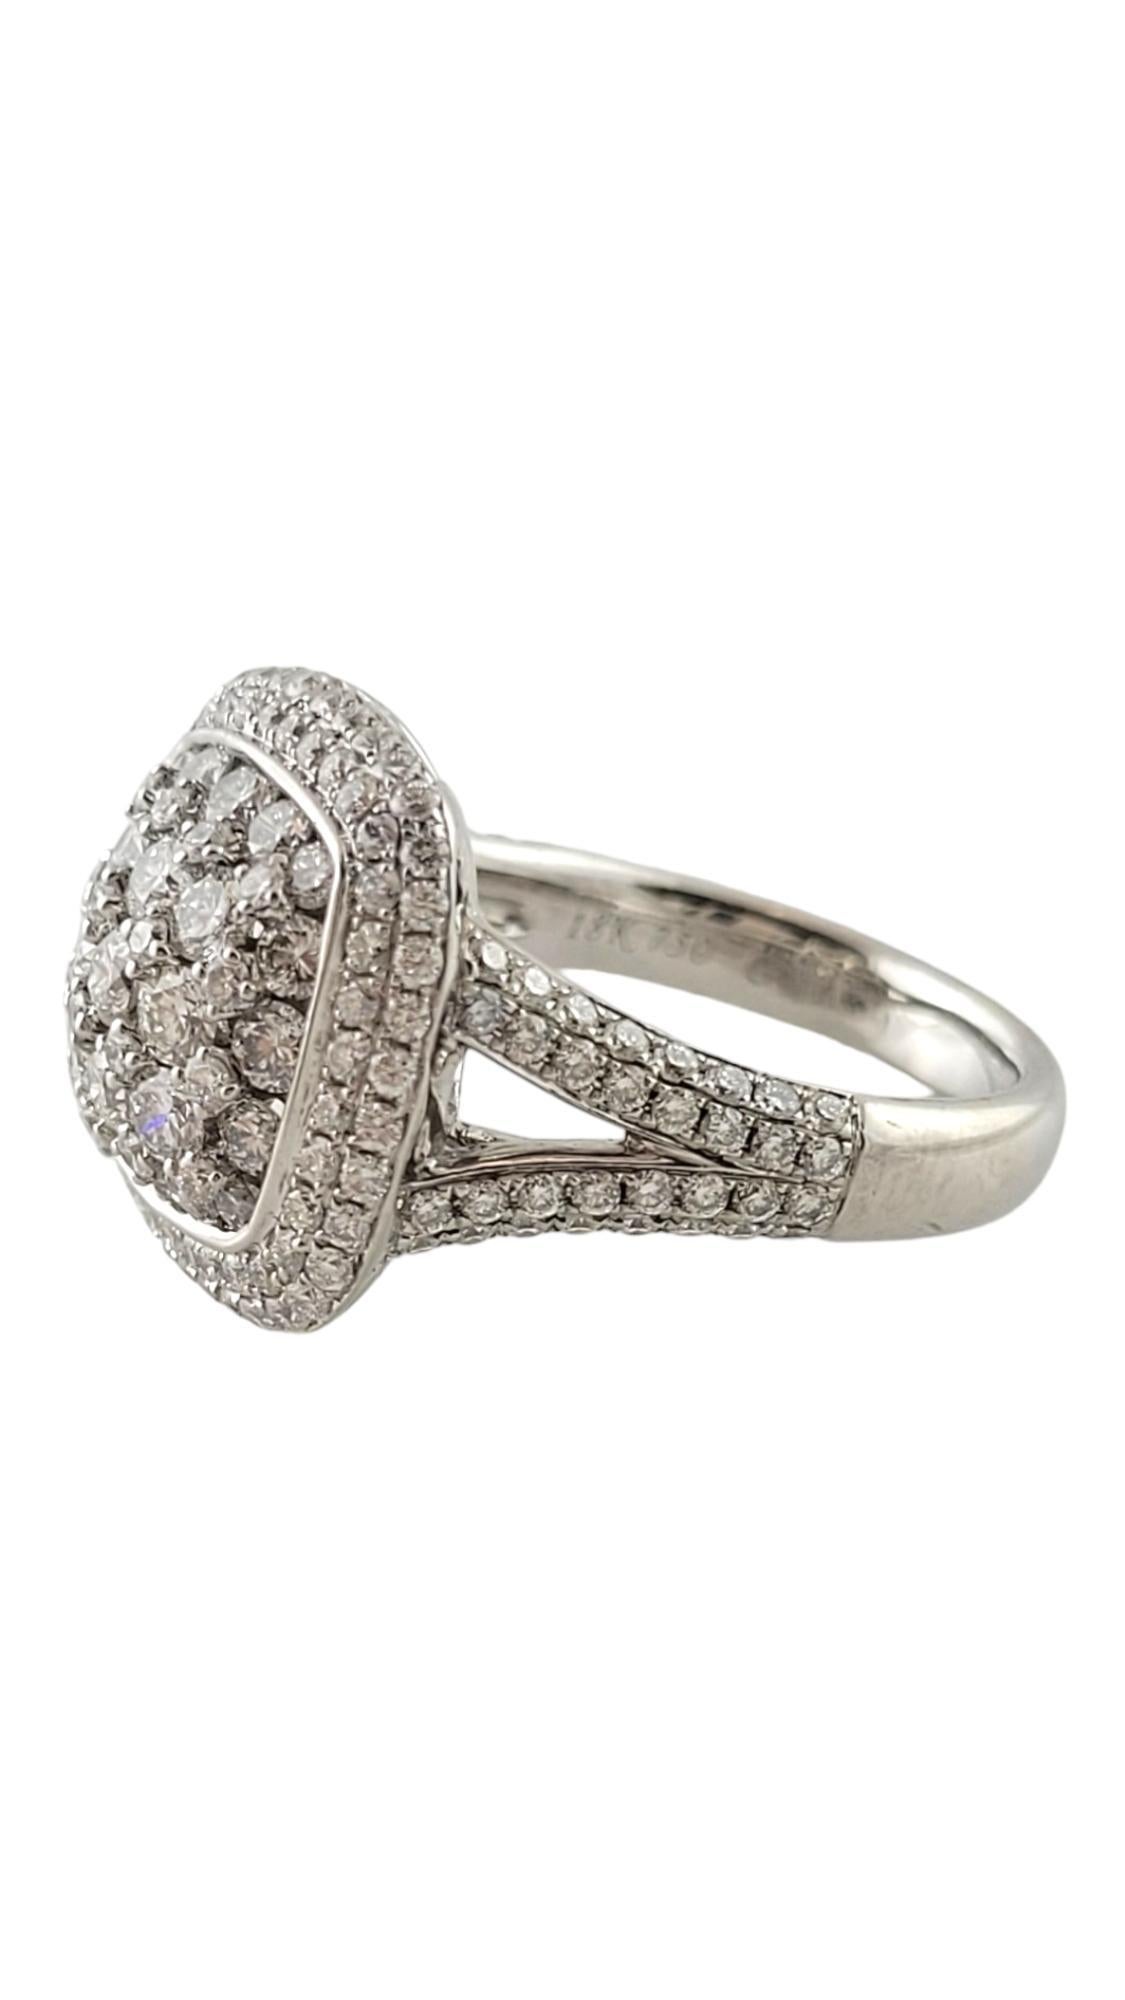 This sparkling ring features 177 round brilliant cut diamonds set in classic 18K white gold.  

Width:  16 mm.  Shank:  3 mm.

Total diamond weight:  2.21 ct.

Diamond clarity: VS2-SI1

Diamond color:  G-H

Ring Size: 6.25

Weight:  6.4 dwt. /  10.0